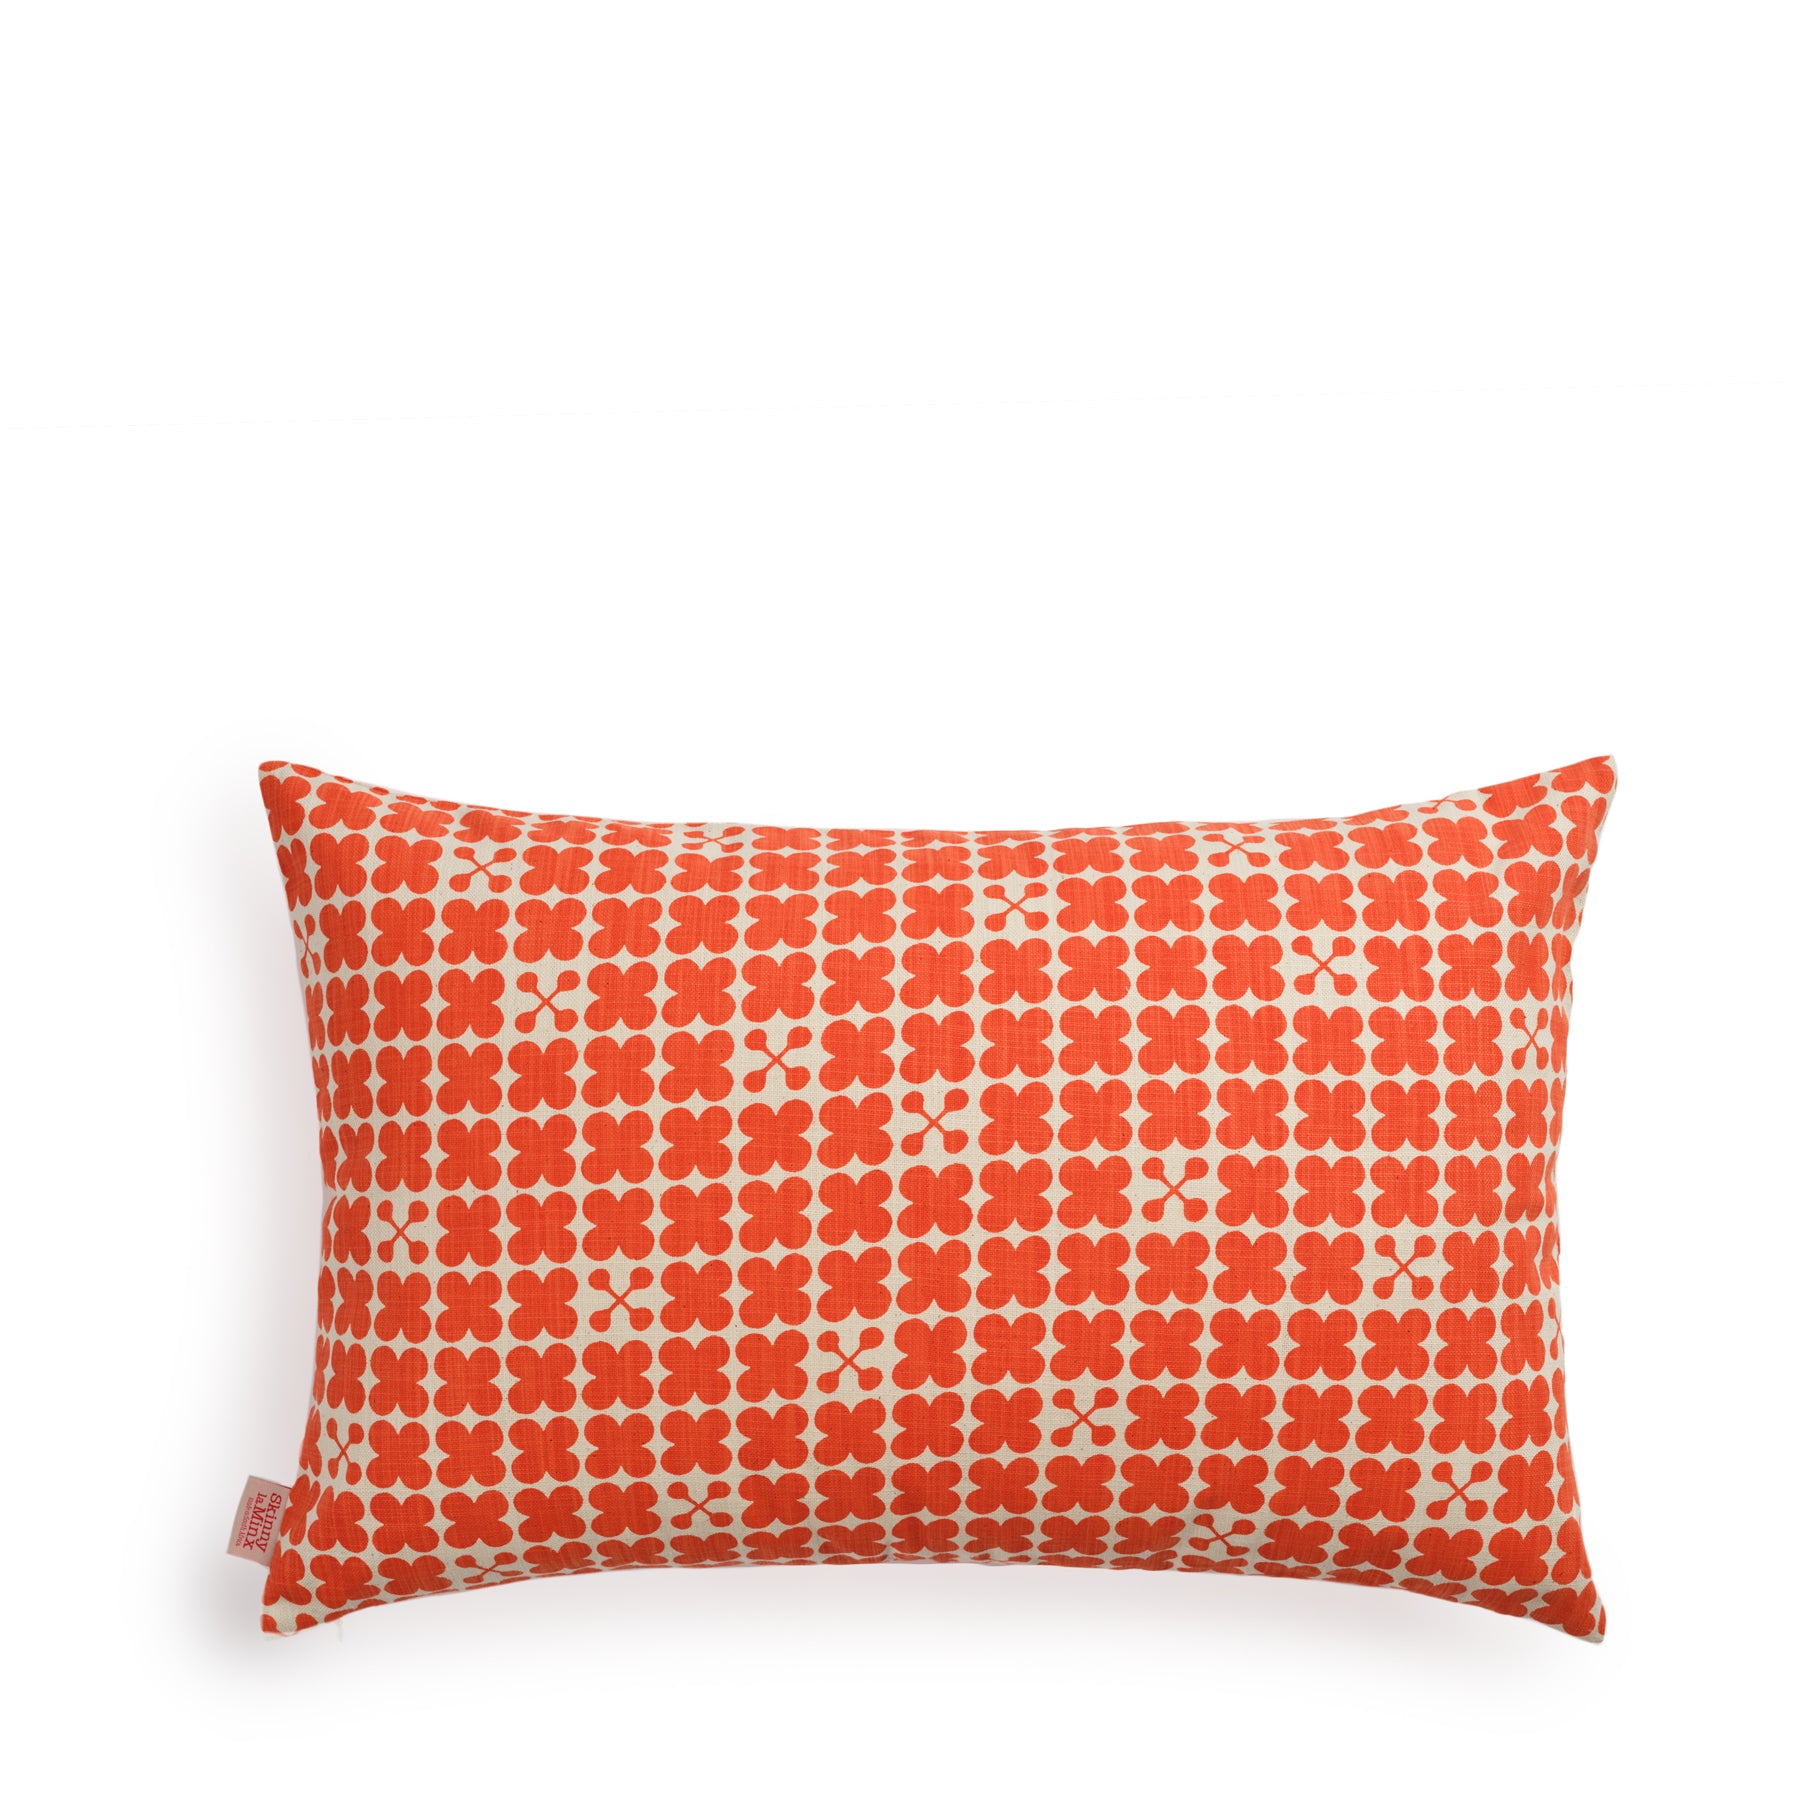 Scandi Candy Pillow in Persimmon Zoom Image 1